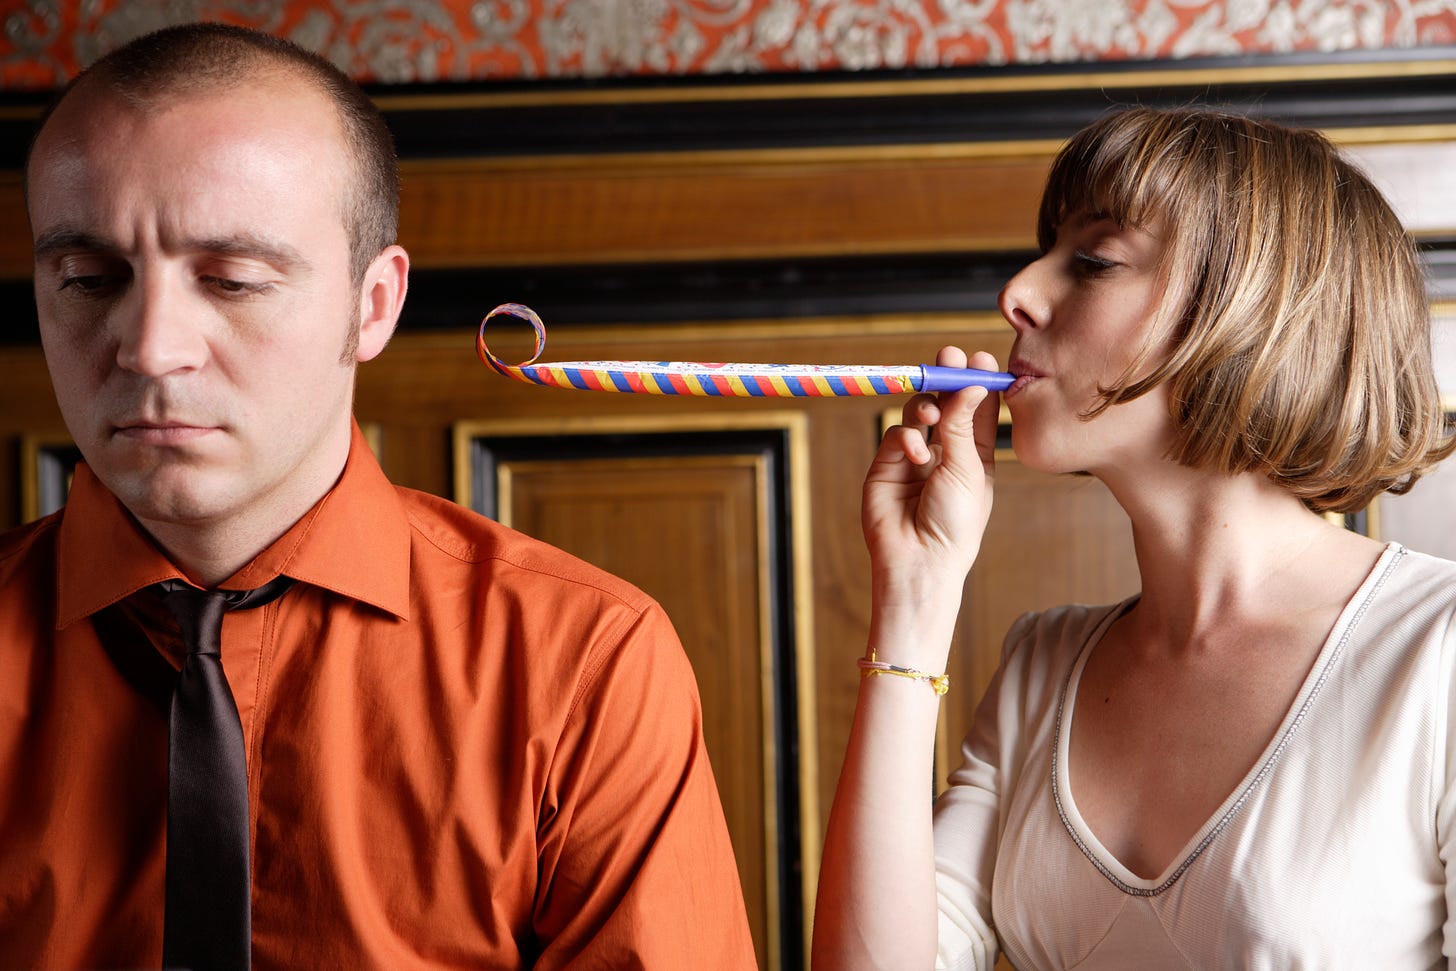 A short haired woman blowing a party noisemaker at the ear of a decidedly unamused man in a tie.